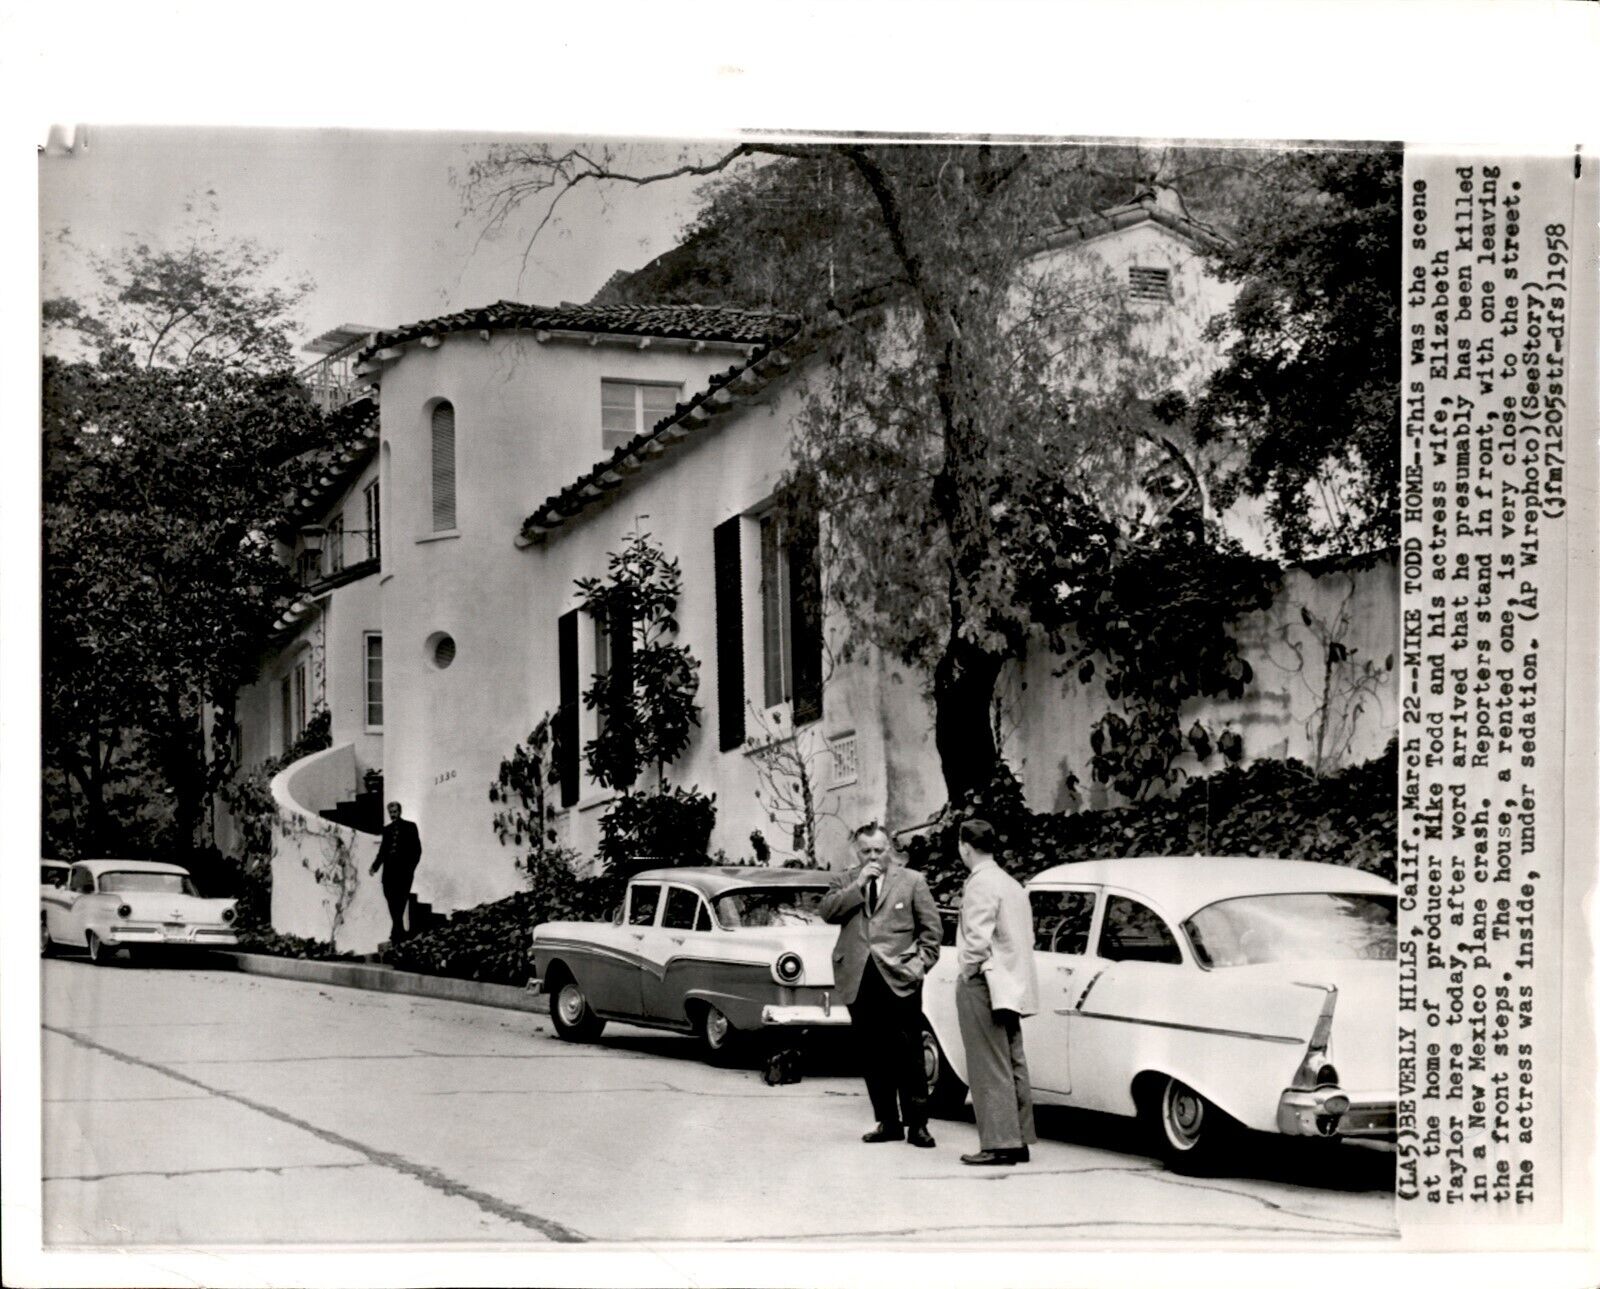 LG54 1958 Wire Photo HOME OF ELIZABETH TAYLOR & MIKE TODD AFTER HIS PLANE CRASH